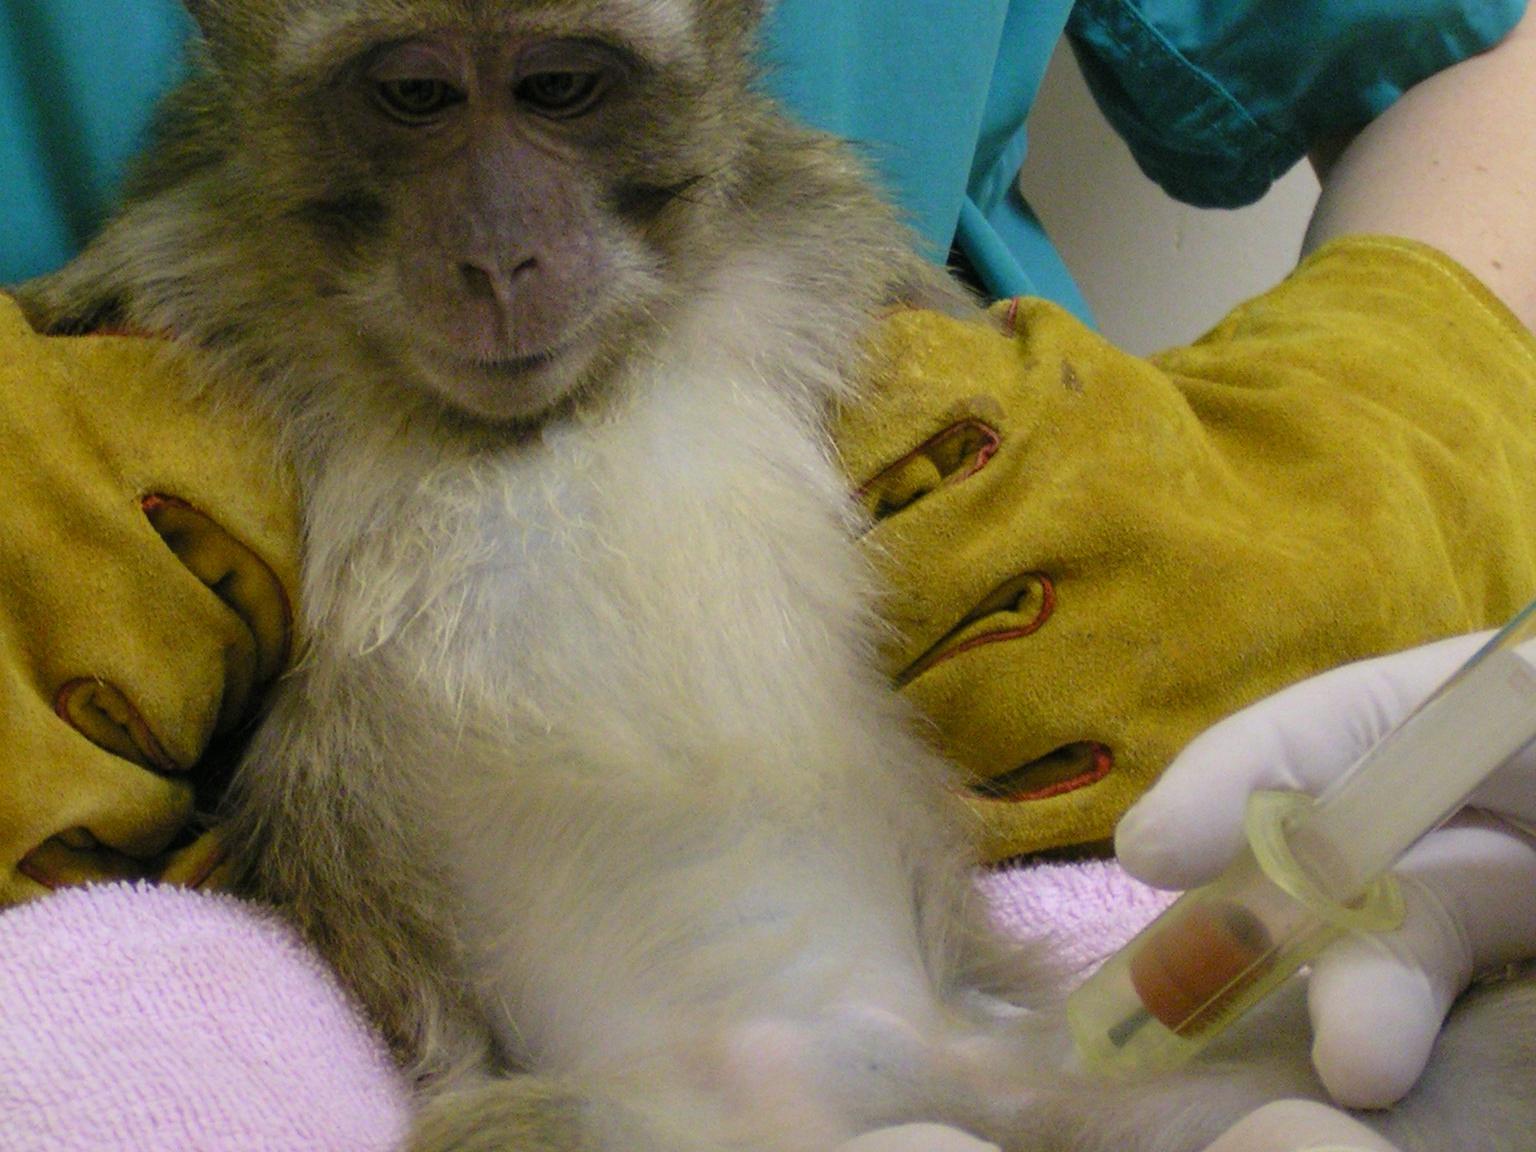 A cynomolgus macaque is handled with gauntlets by one technician while another technician draws a blood sample from its leg